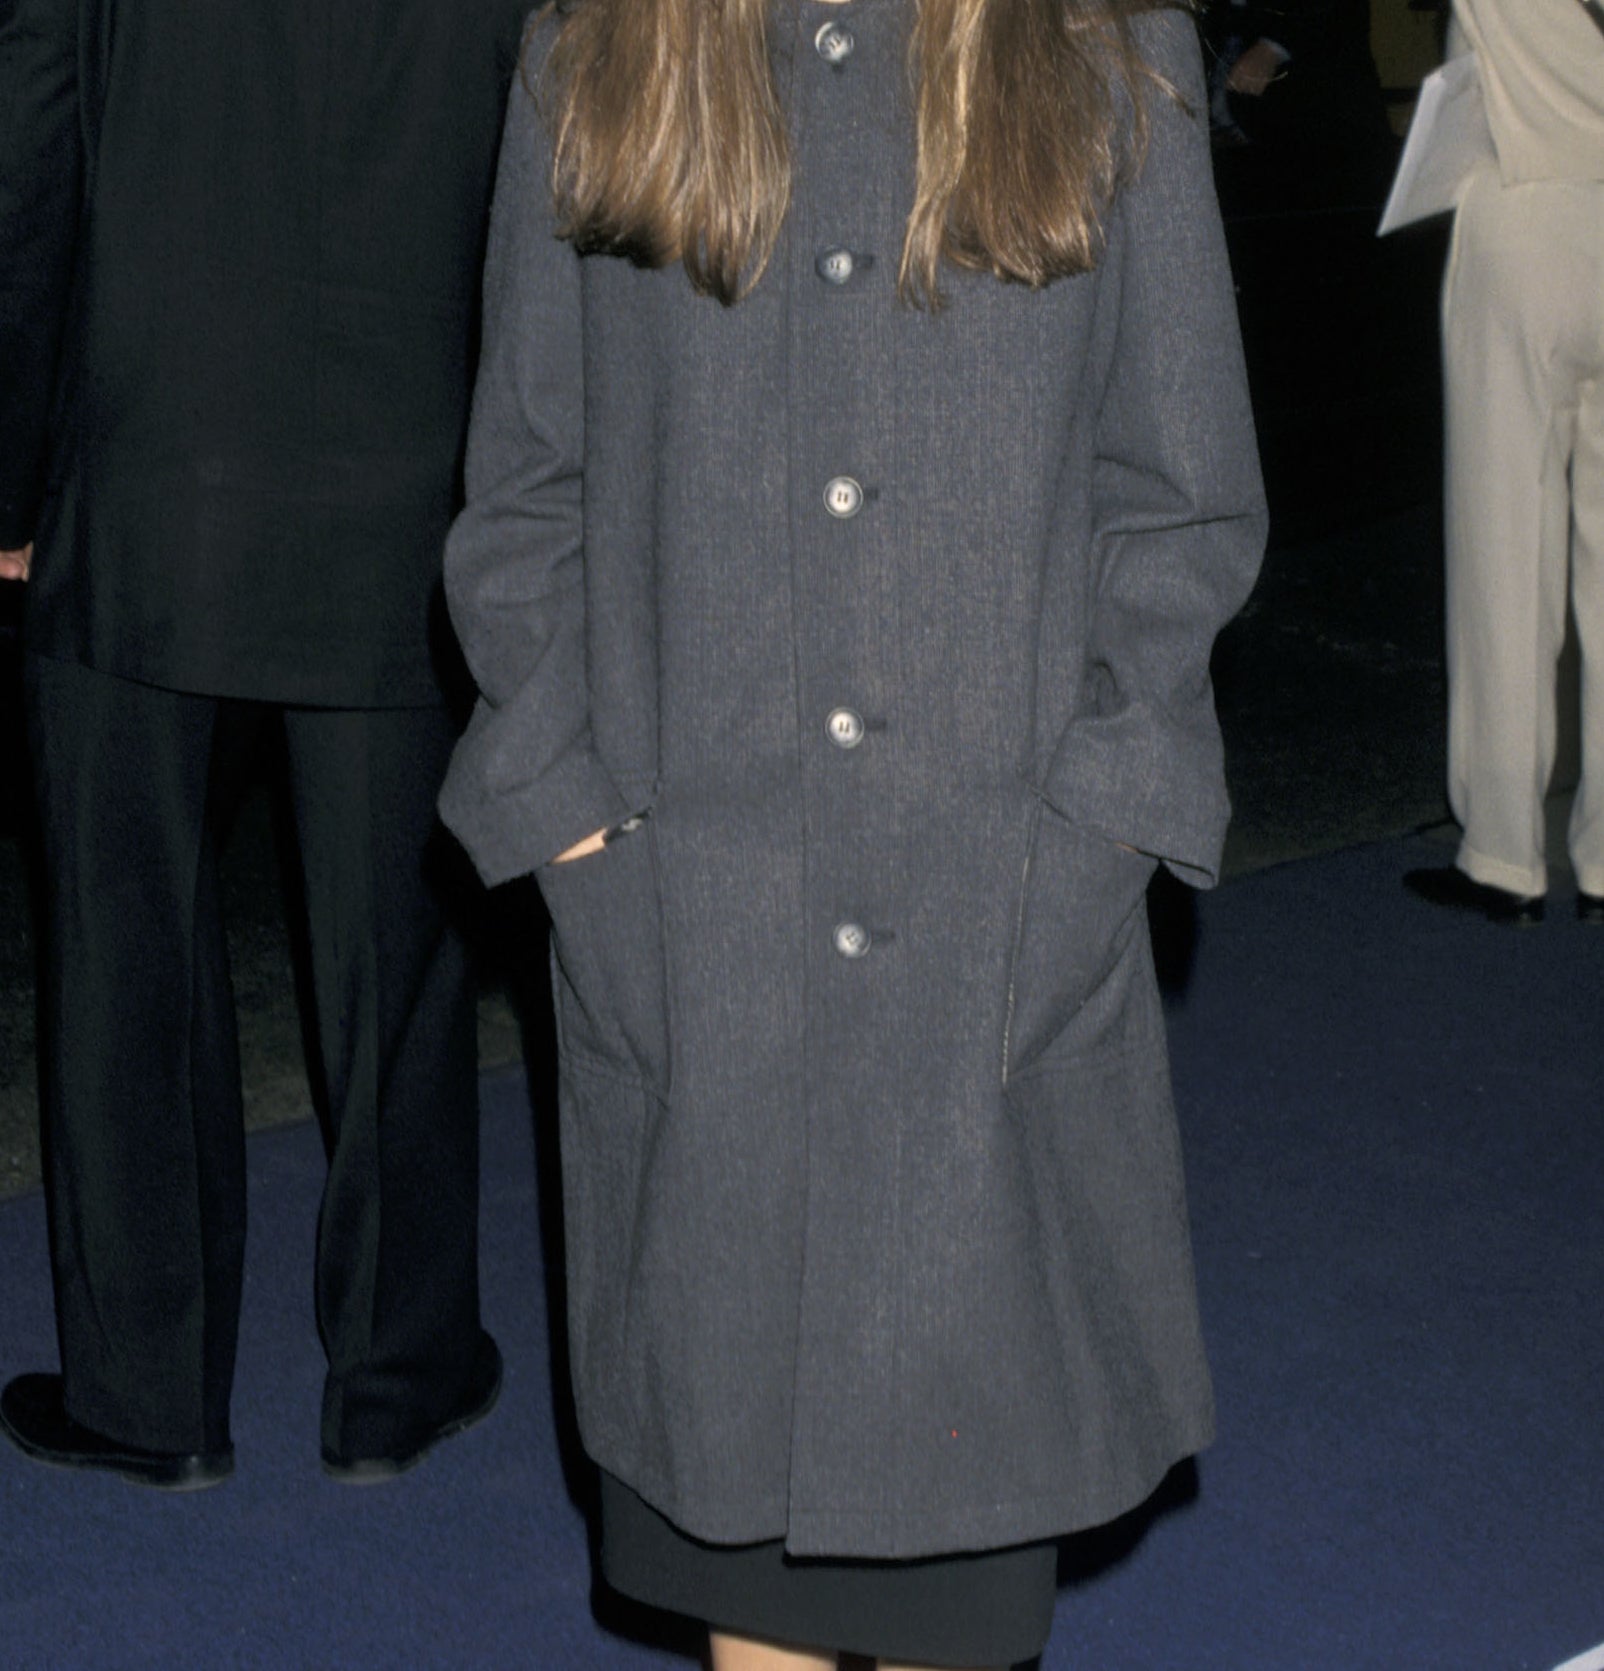 young natalie in an oversized jacket at an event